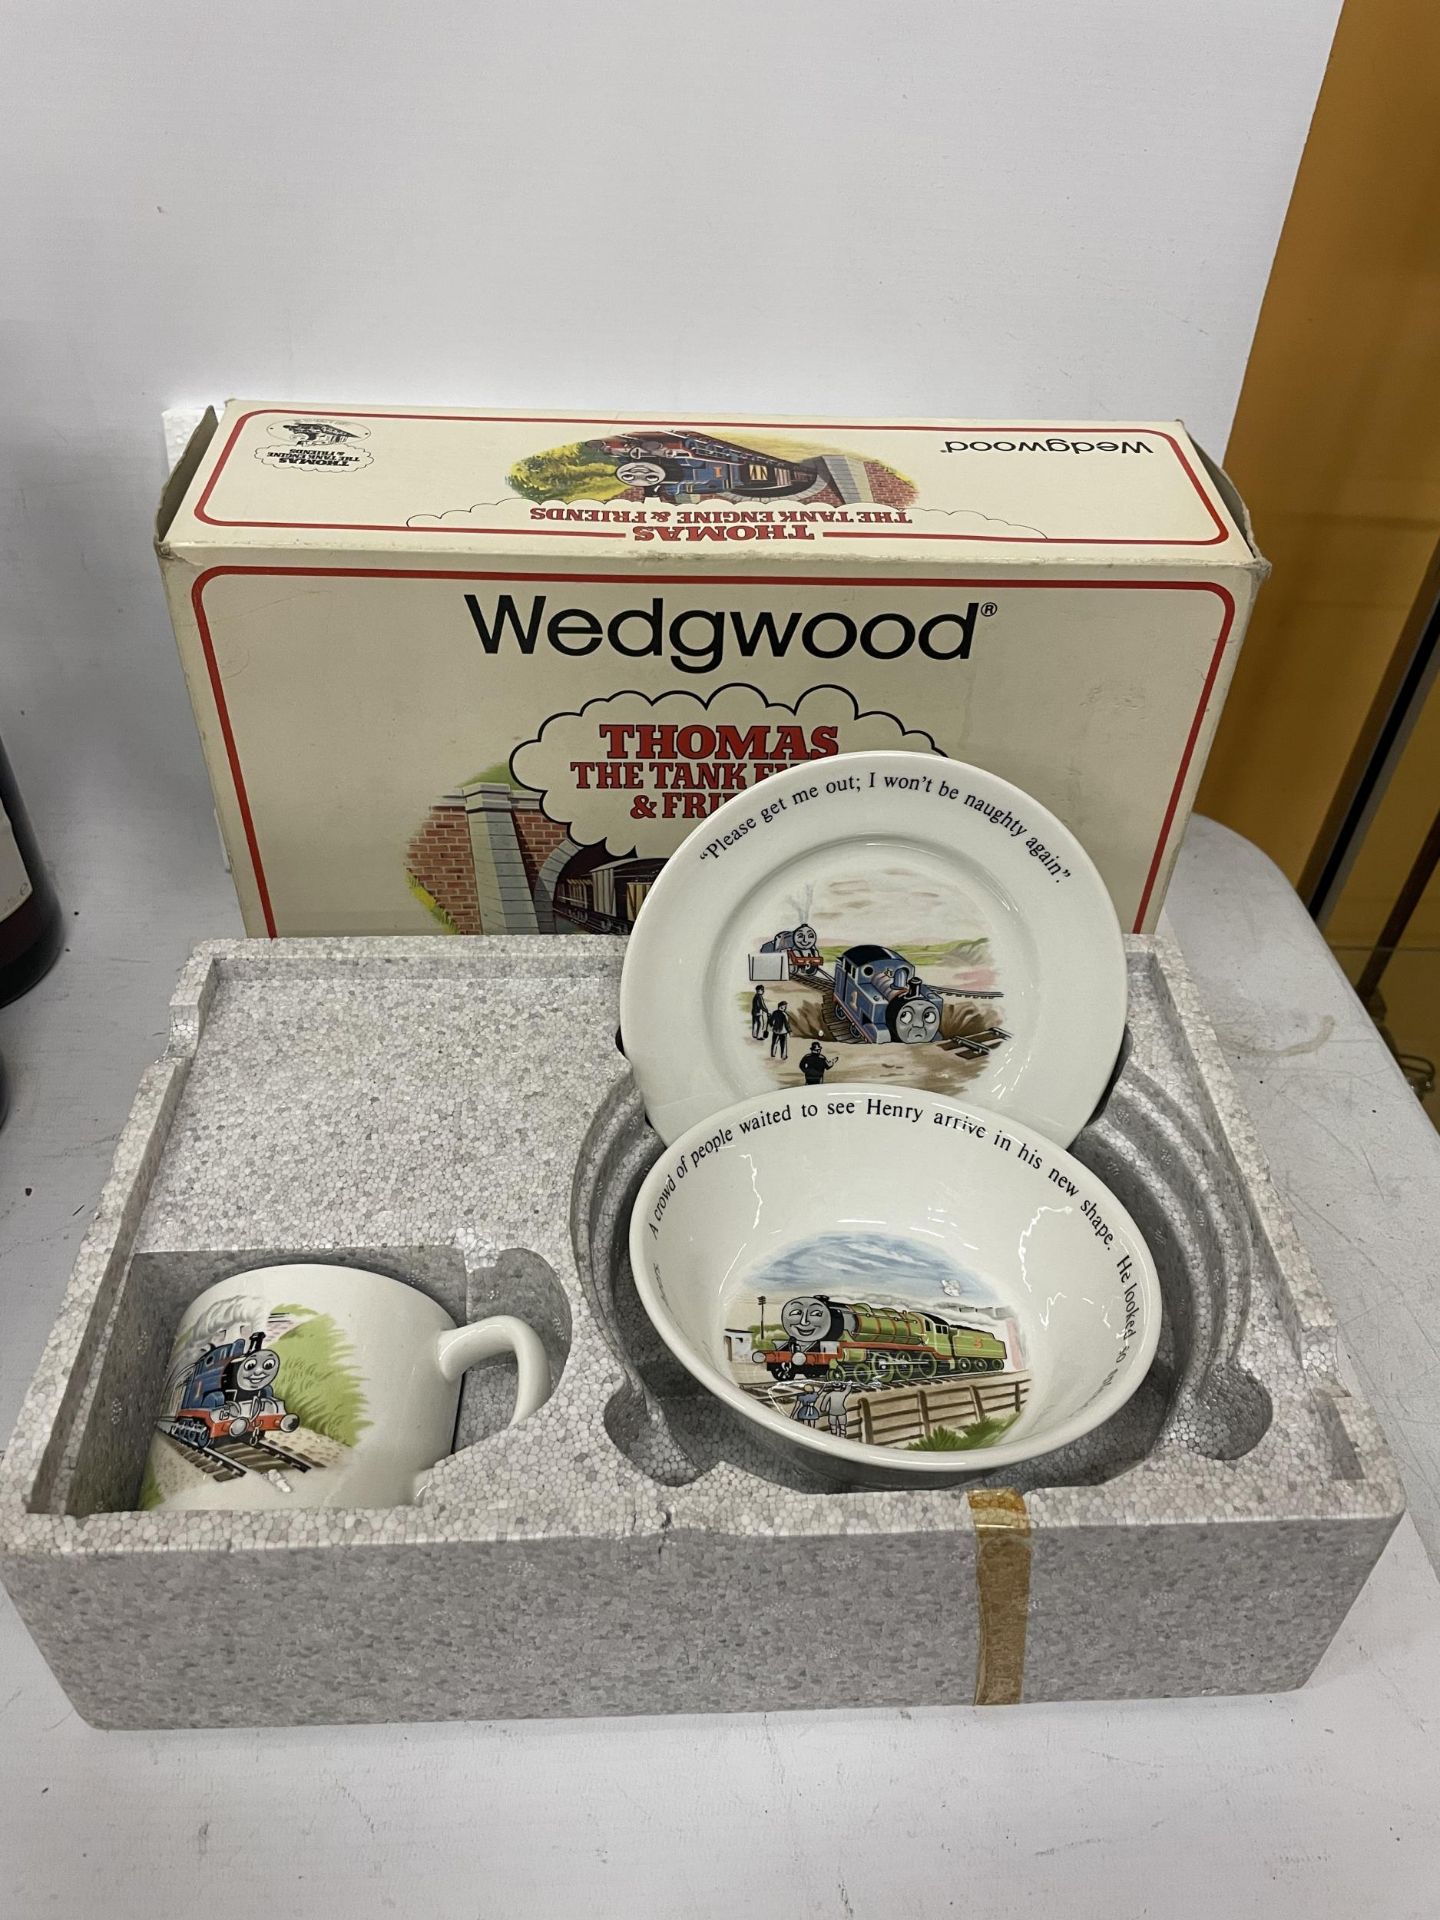 A BOXED WEDGWOOD THOMAS THE TANK ENGINE & FRIENDS SET